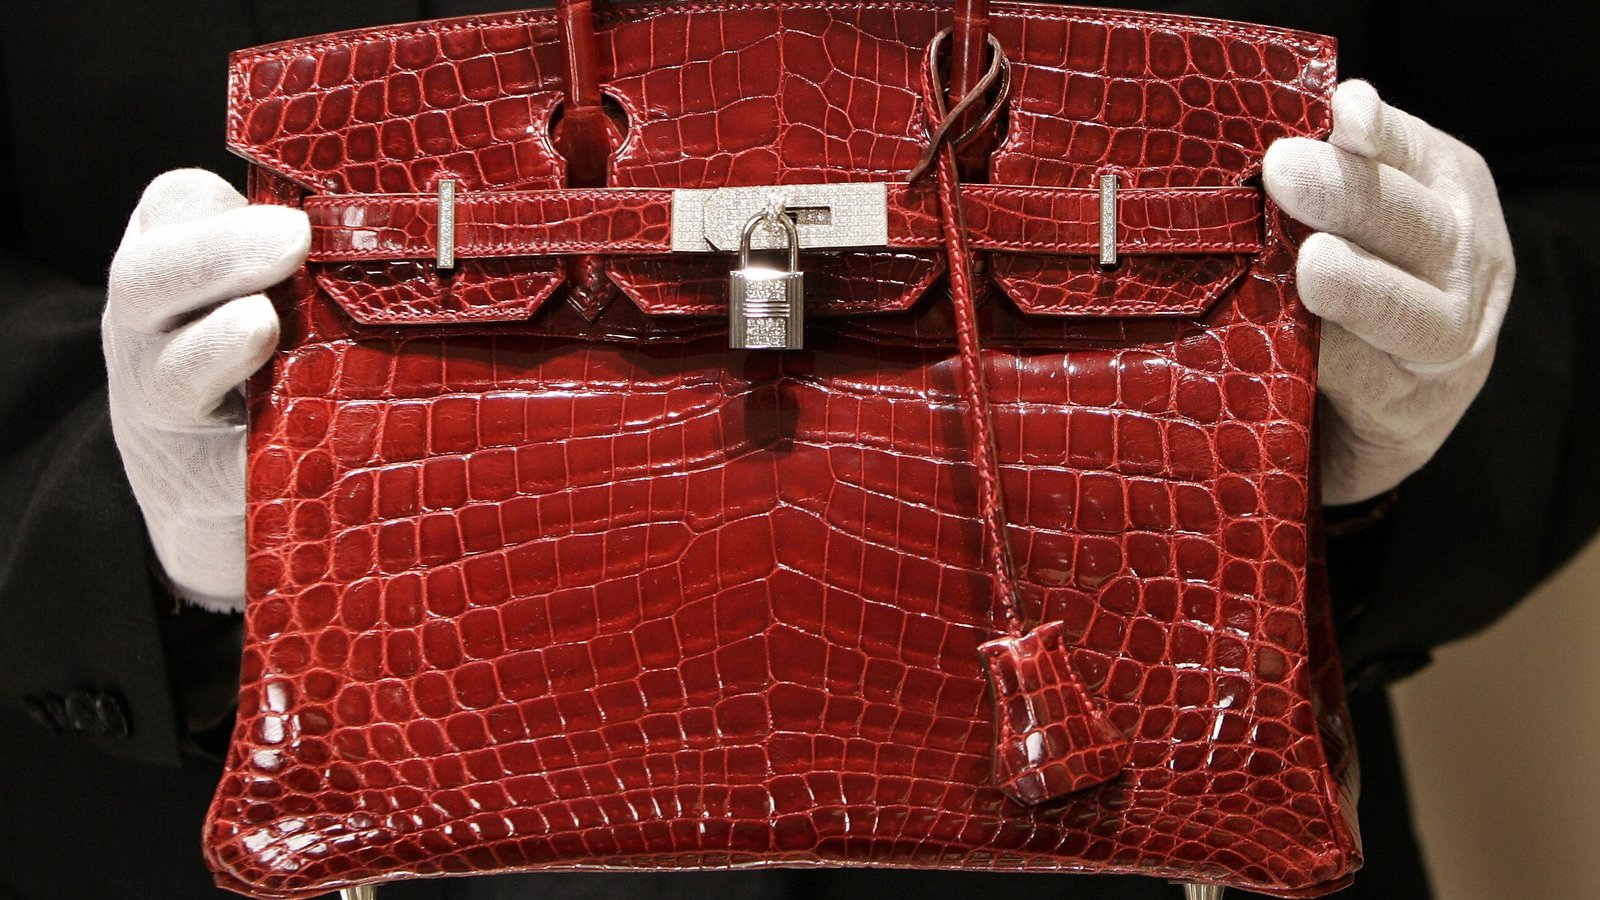 Hermes to Boost Prices Amid Continued Luxury Resilience